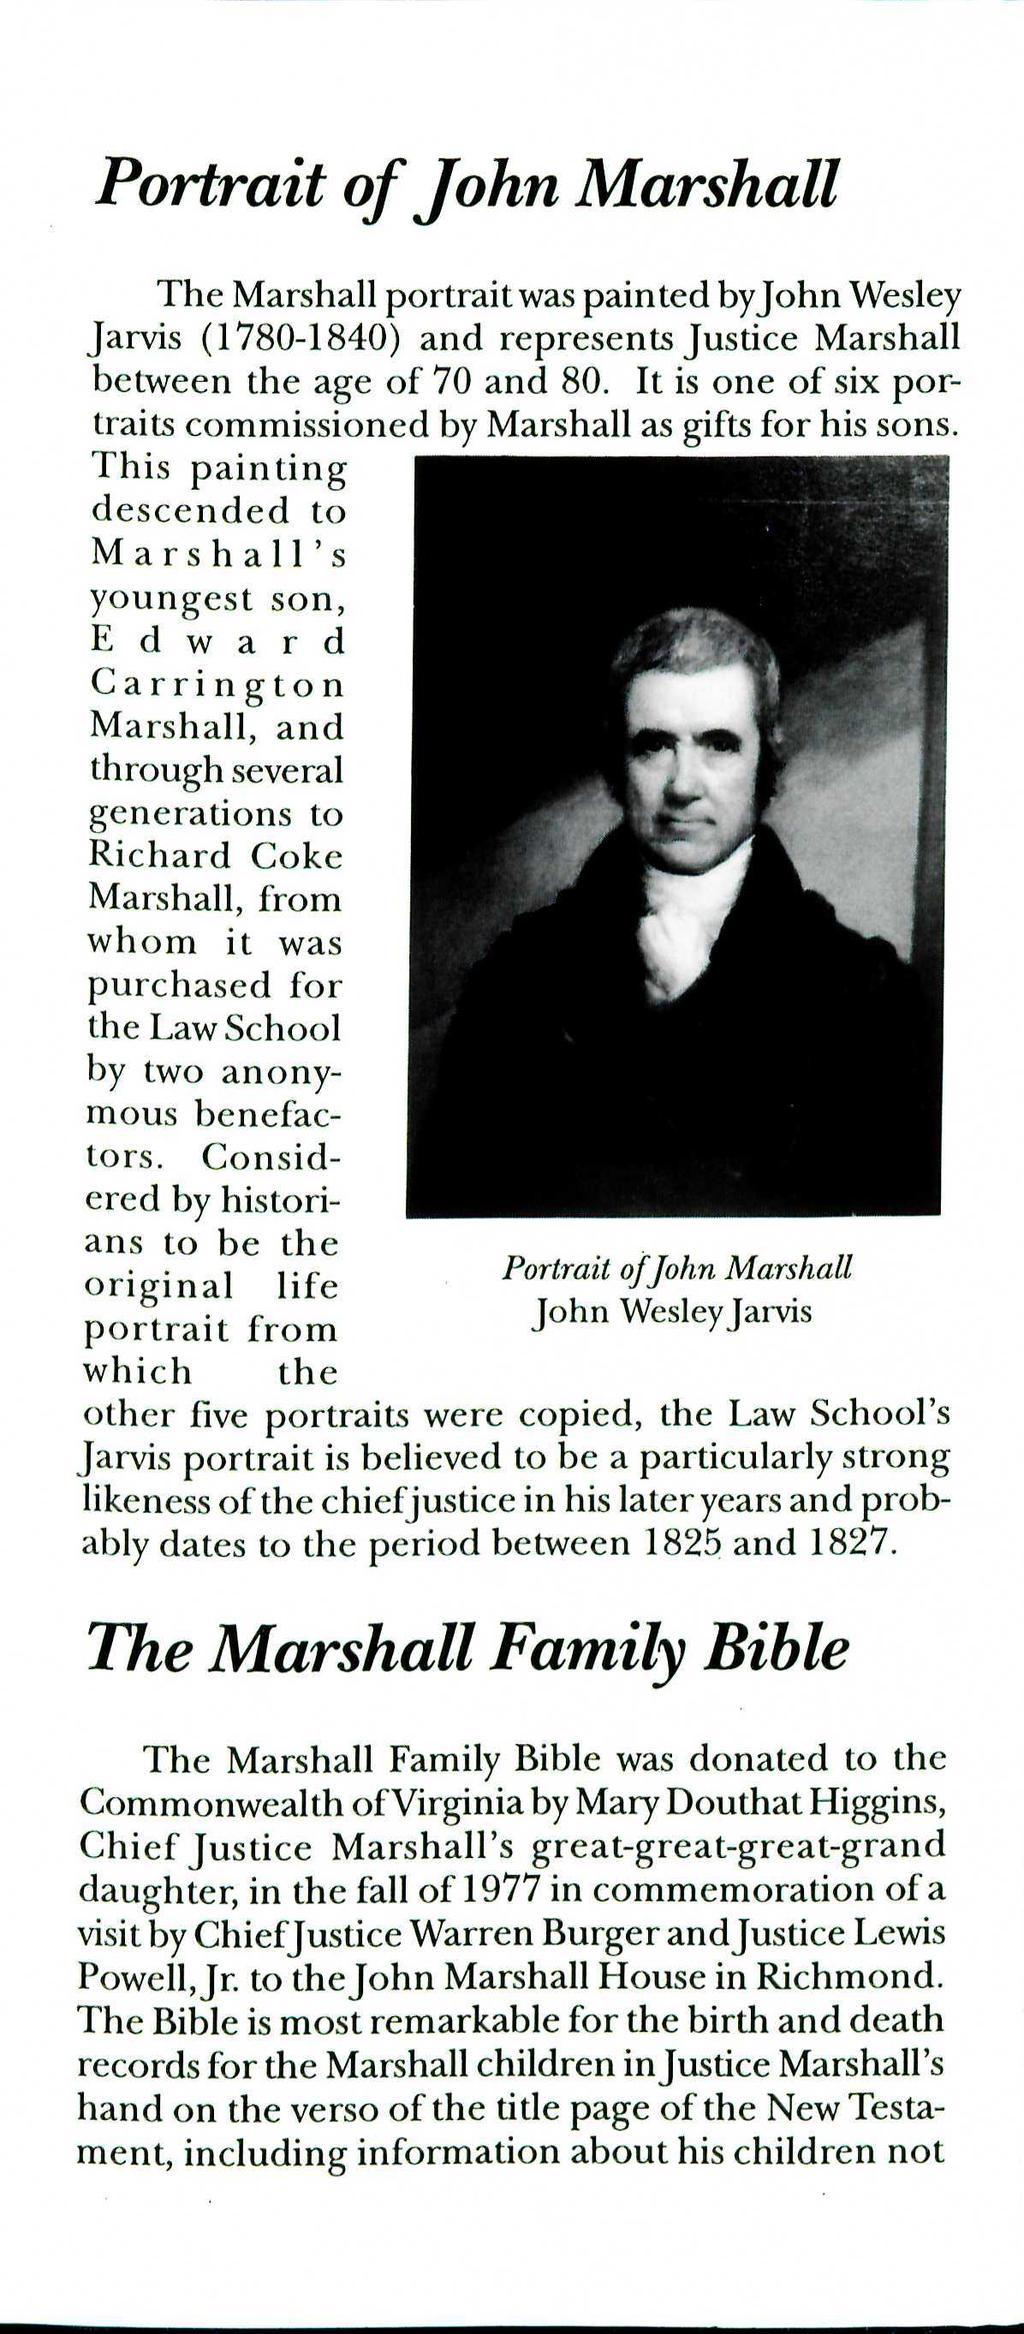 Portrait of John Marshall The Marshall portrait was painted byjohn Wesley Jarvis (1780-1840) and represents Justice Marshall between the age of 70 and 80.